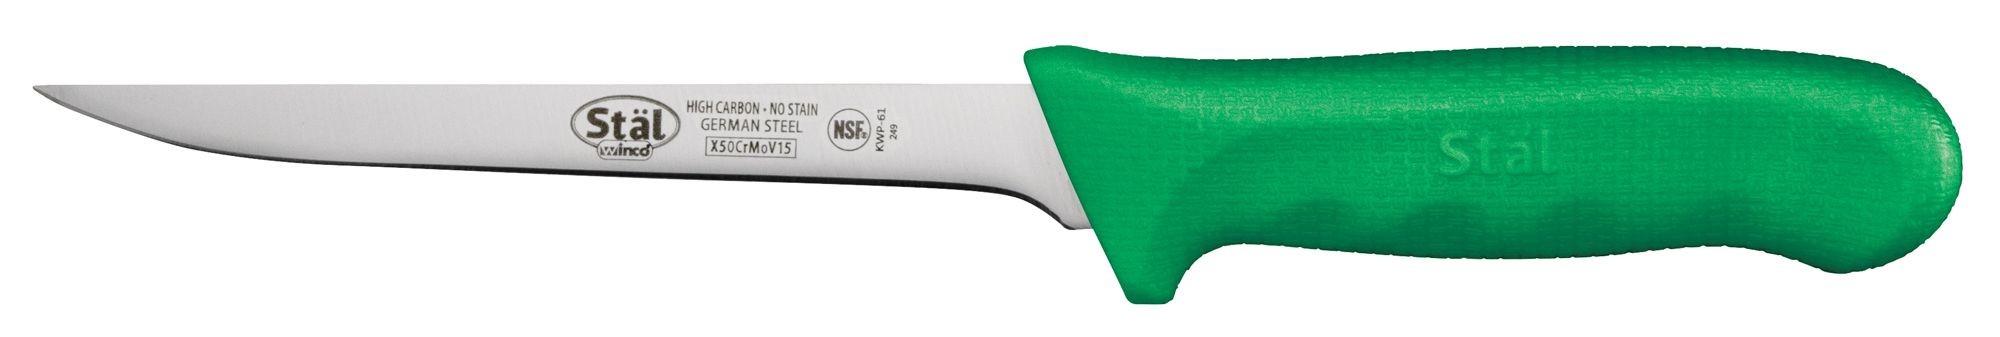 Winco KWP-61G Narrow 6" Boning Knife with Green Handle